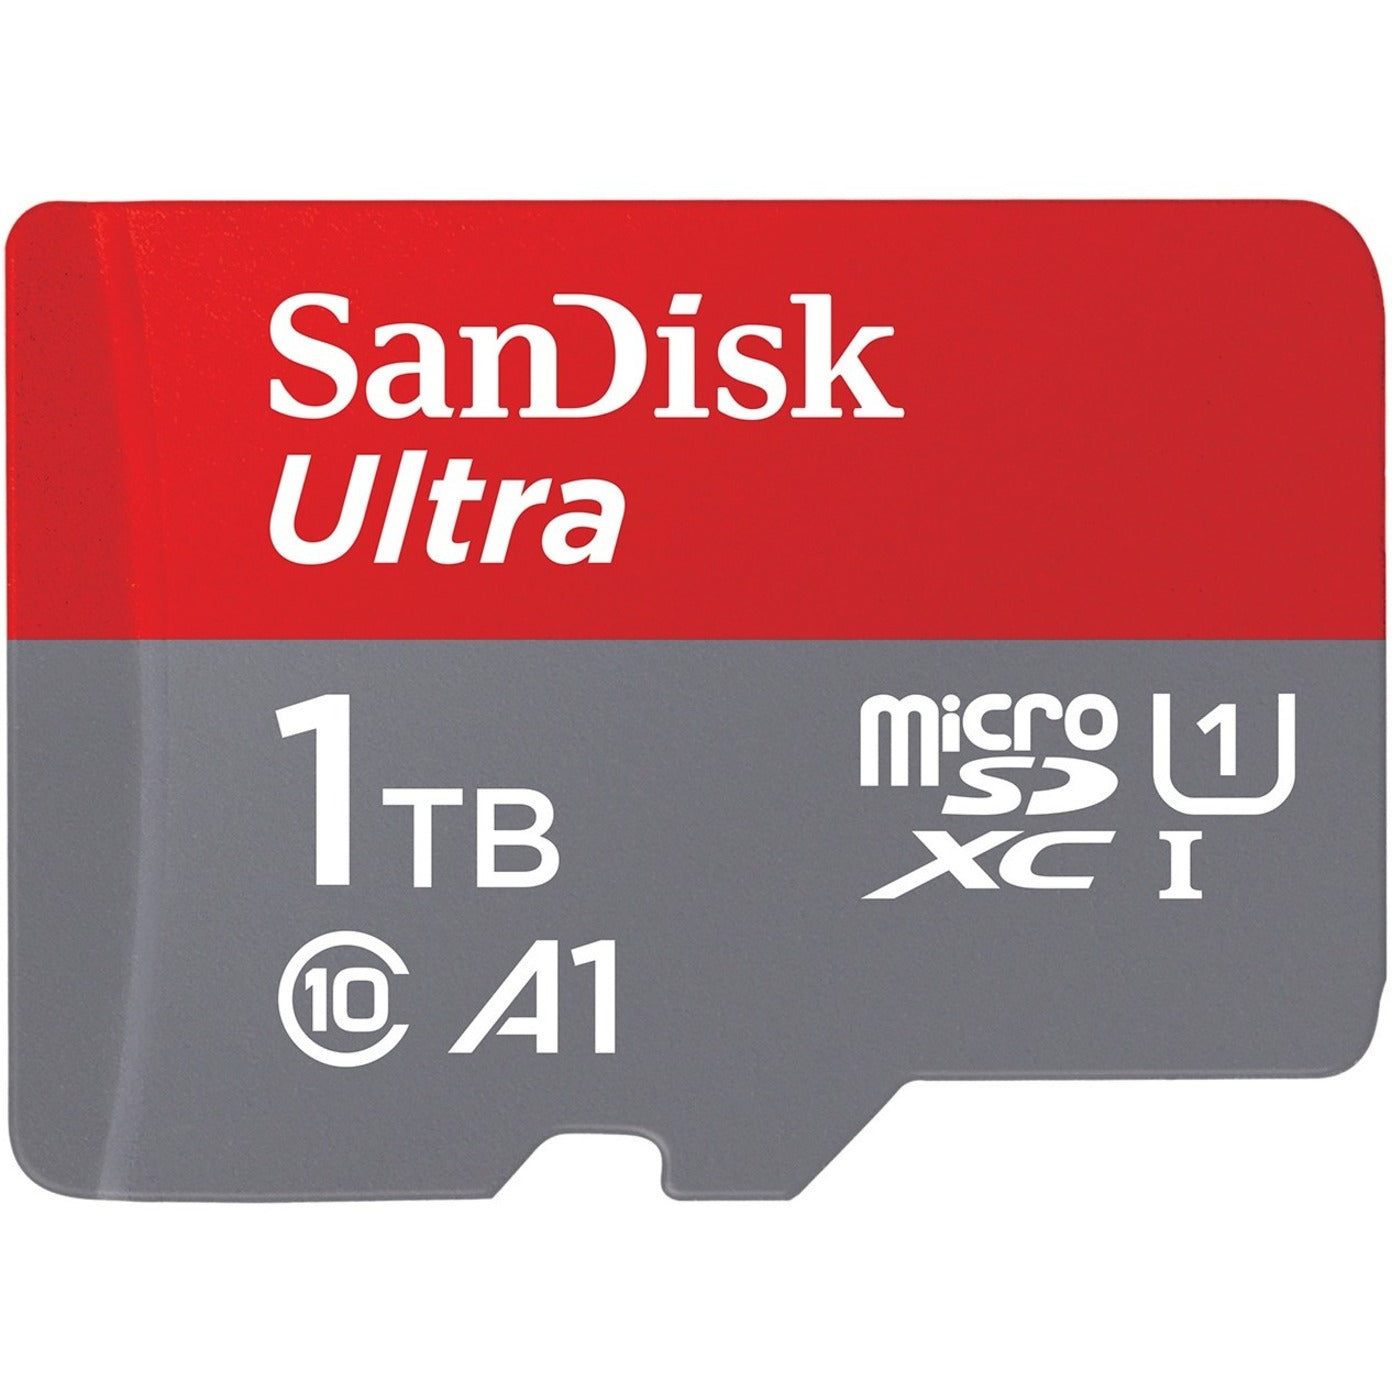 SanDisk SDSQUA4-1T00-AN6MA Ultra microSDXC UHS-I Card with Adapter - 1TB, 10 Year Limited Warranty